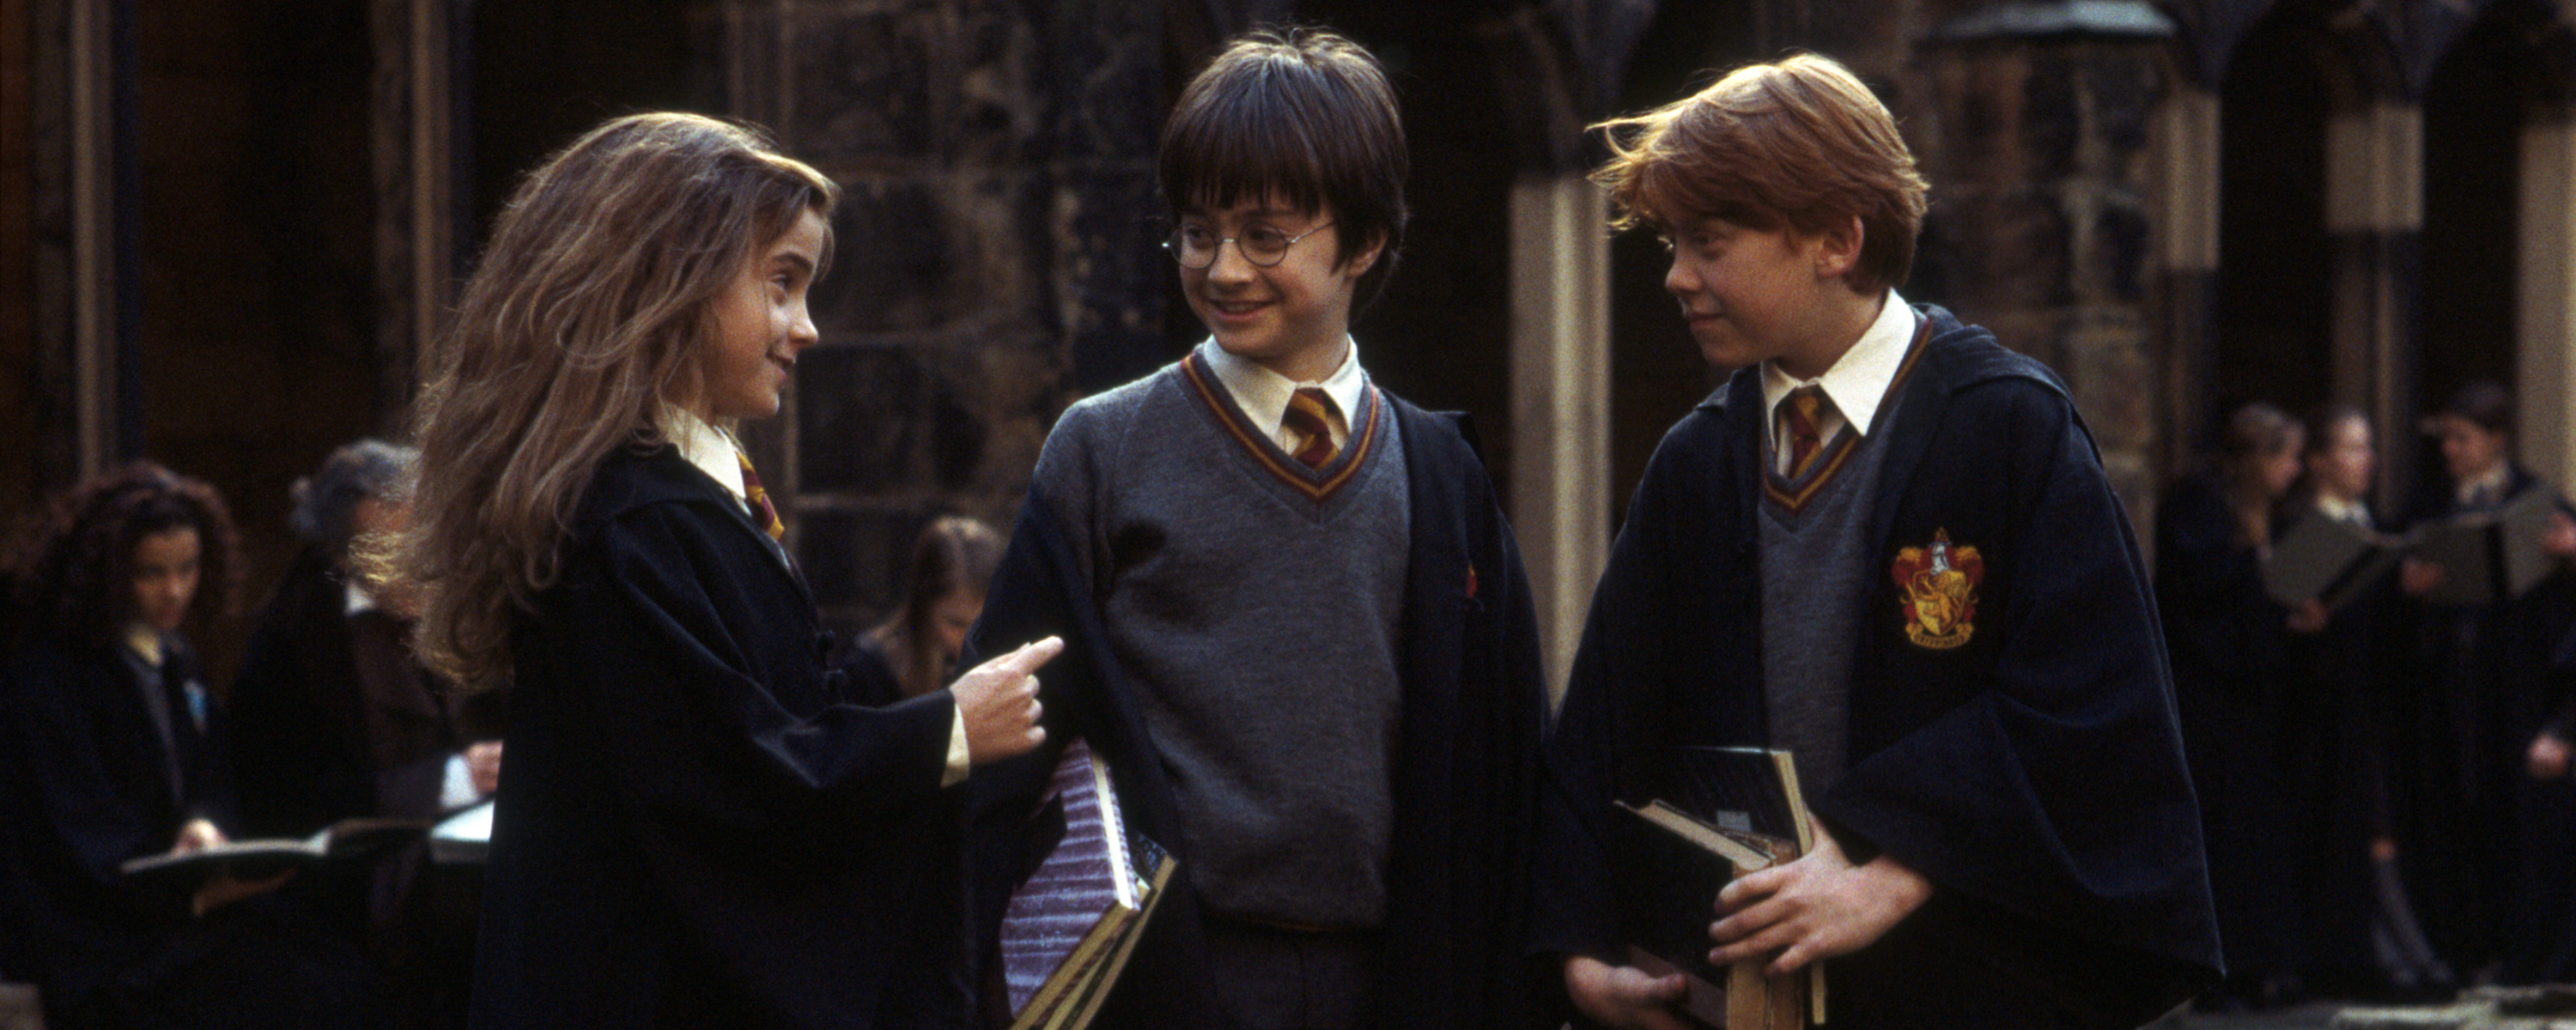 Harry Potter Movies: A Guide to Harry's Friendship with Ron and Hermione 2